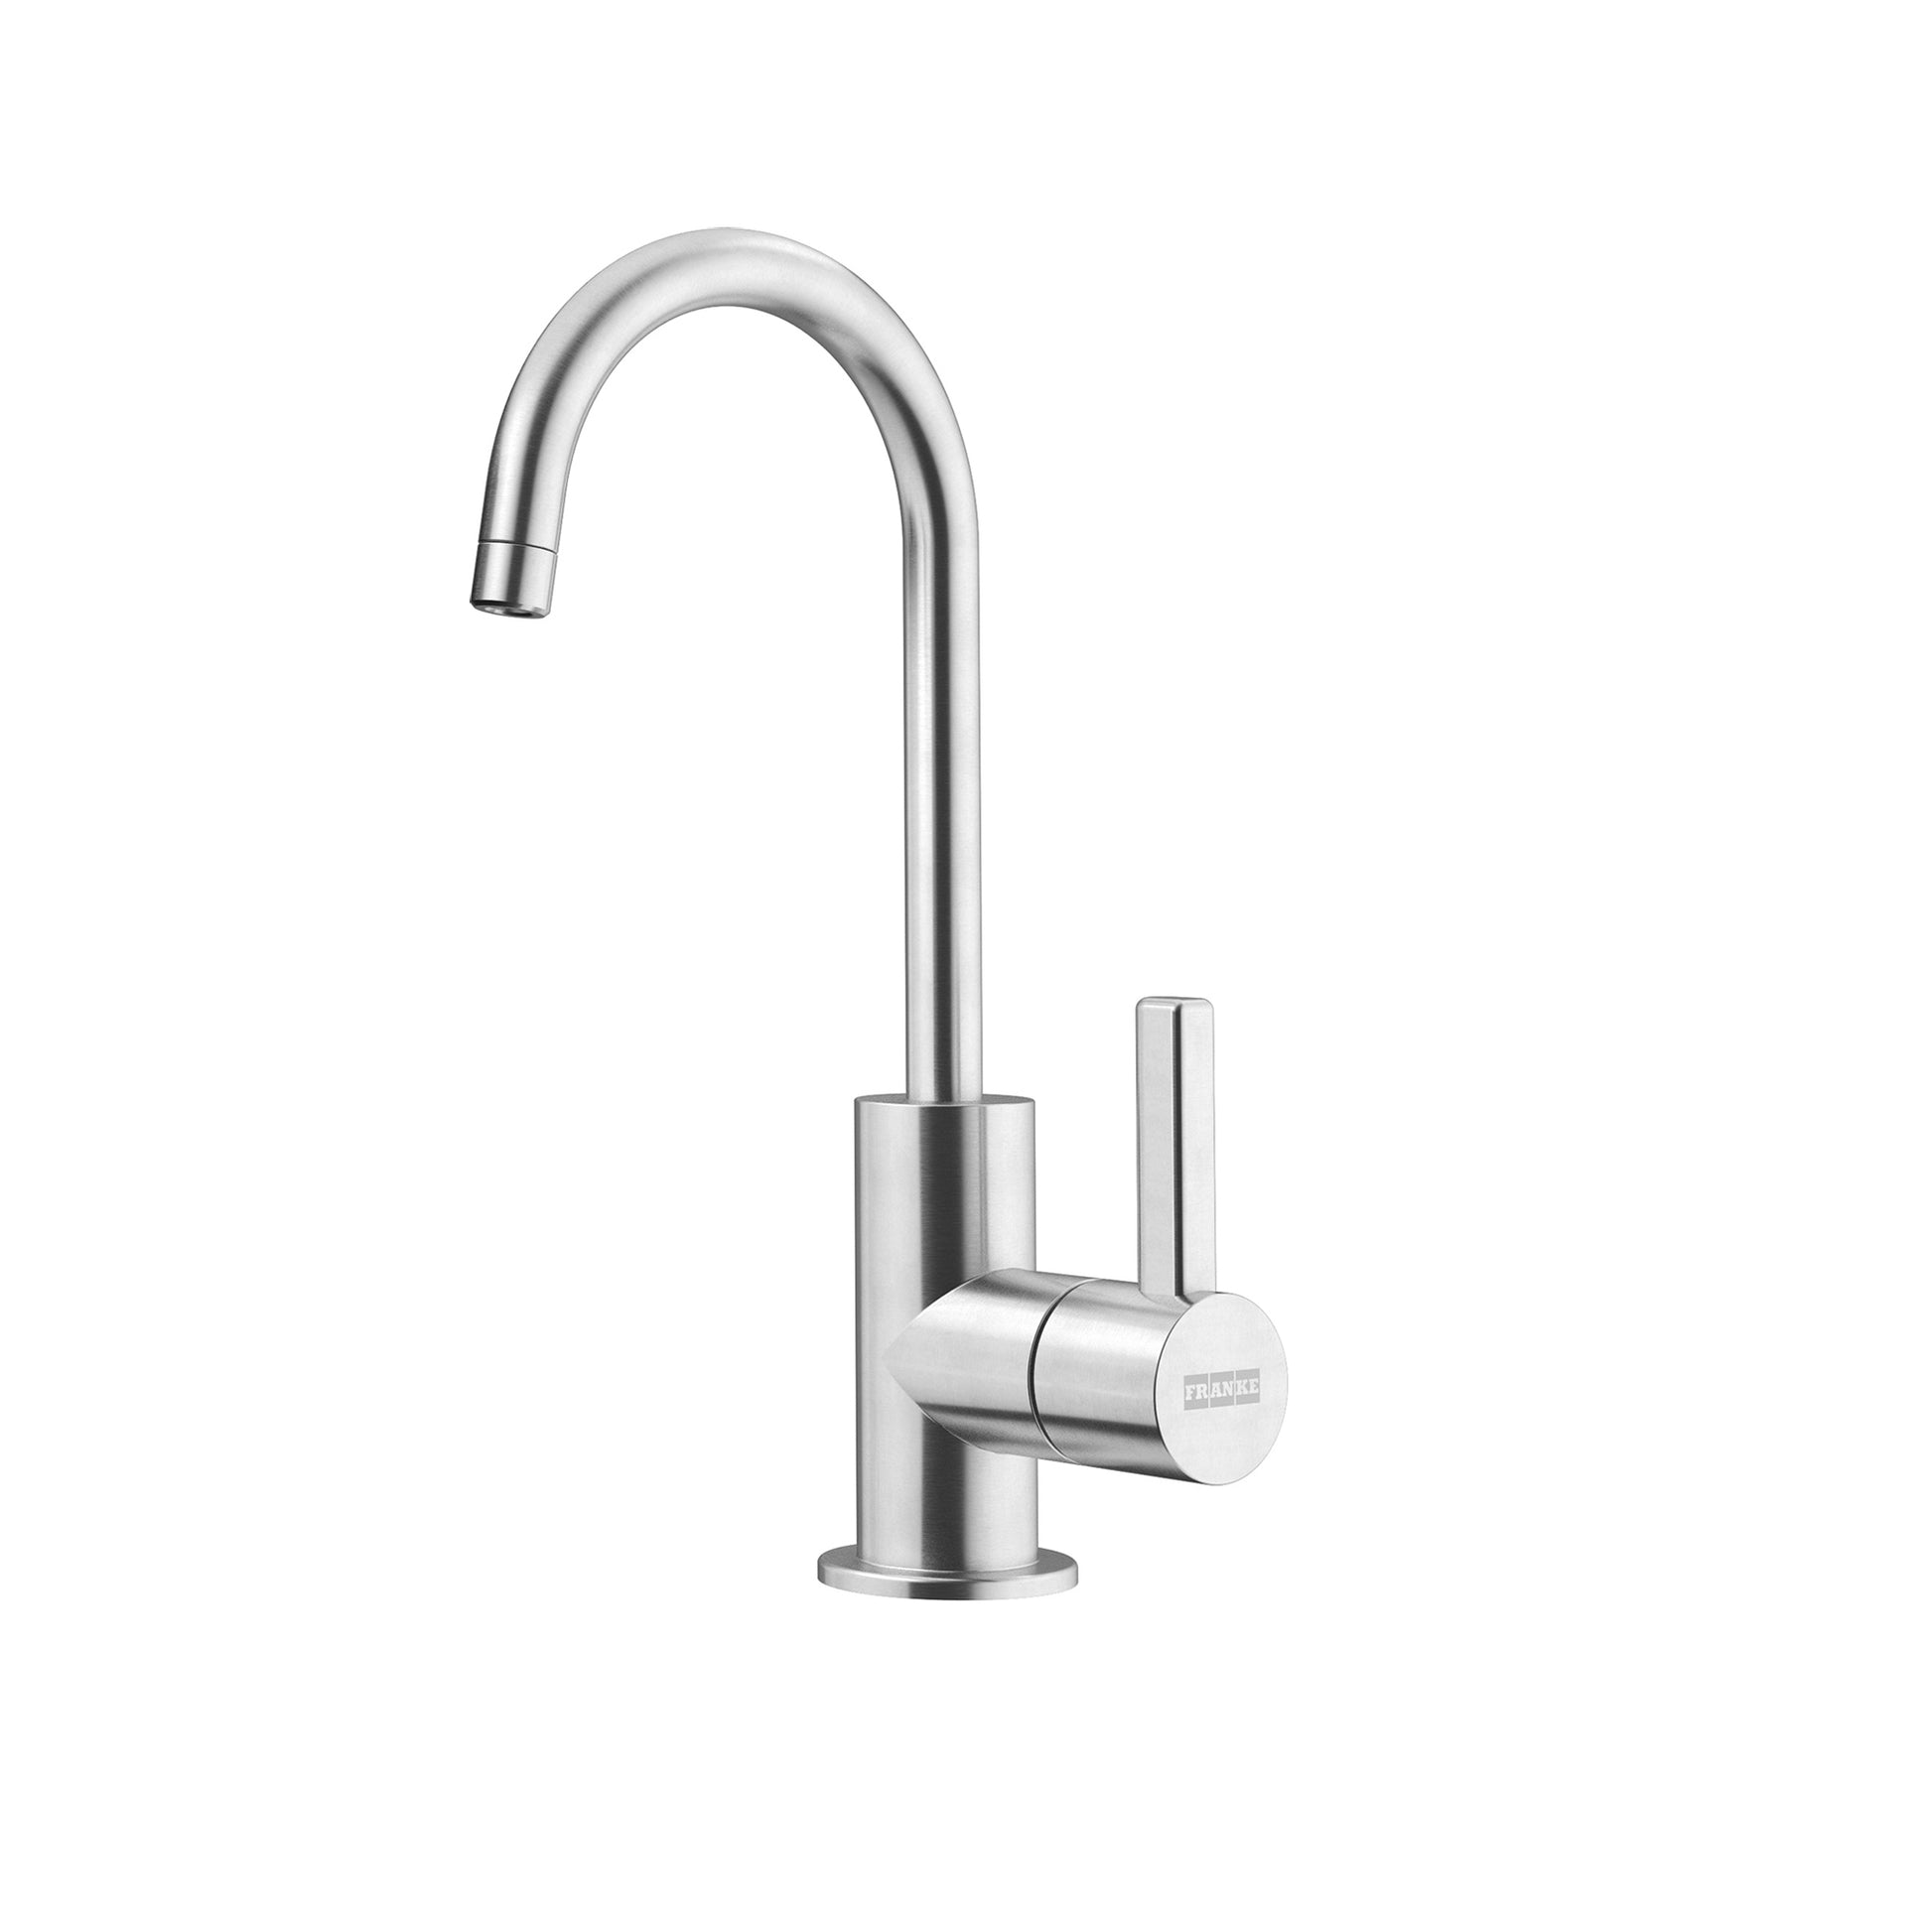 FRANKE UNJ-FW-304 8.75-in Single Handle Cold Water Filtration Faucet in Stainless Steel In Stainless Steel